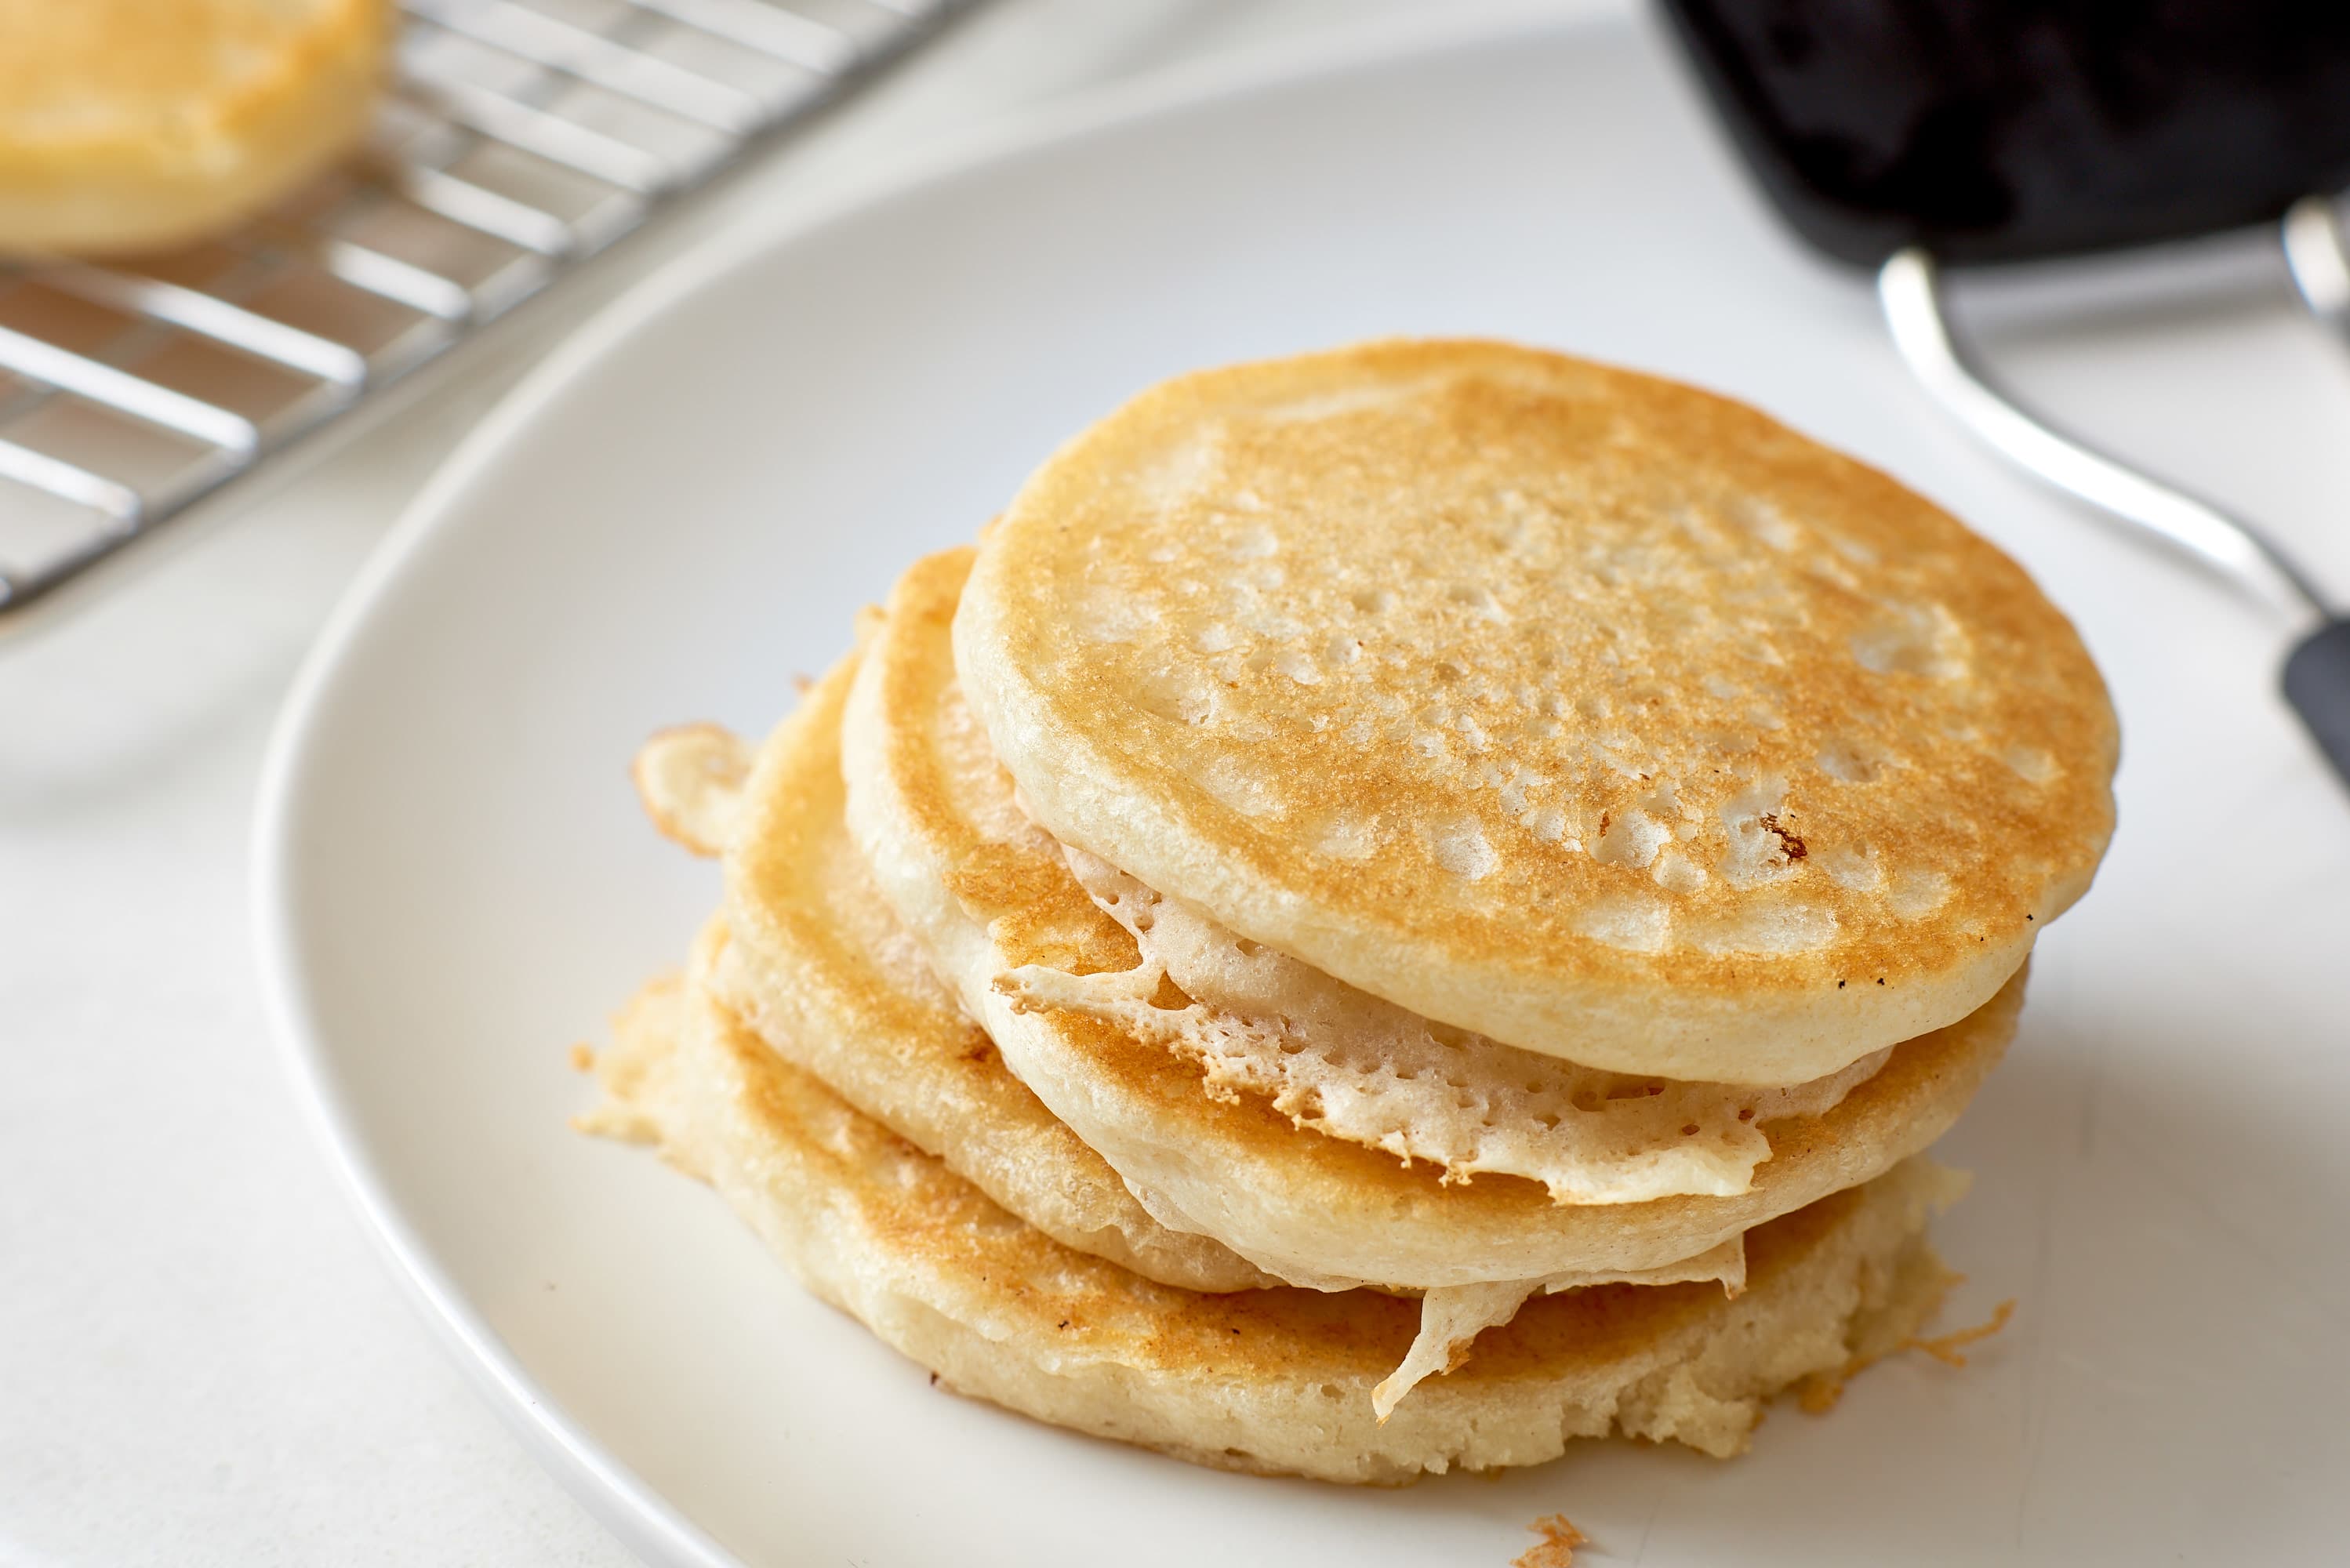 How To Make Fluffy Vegan Pancakes from Scratch